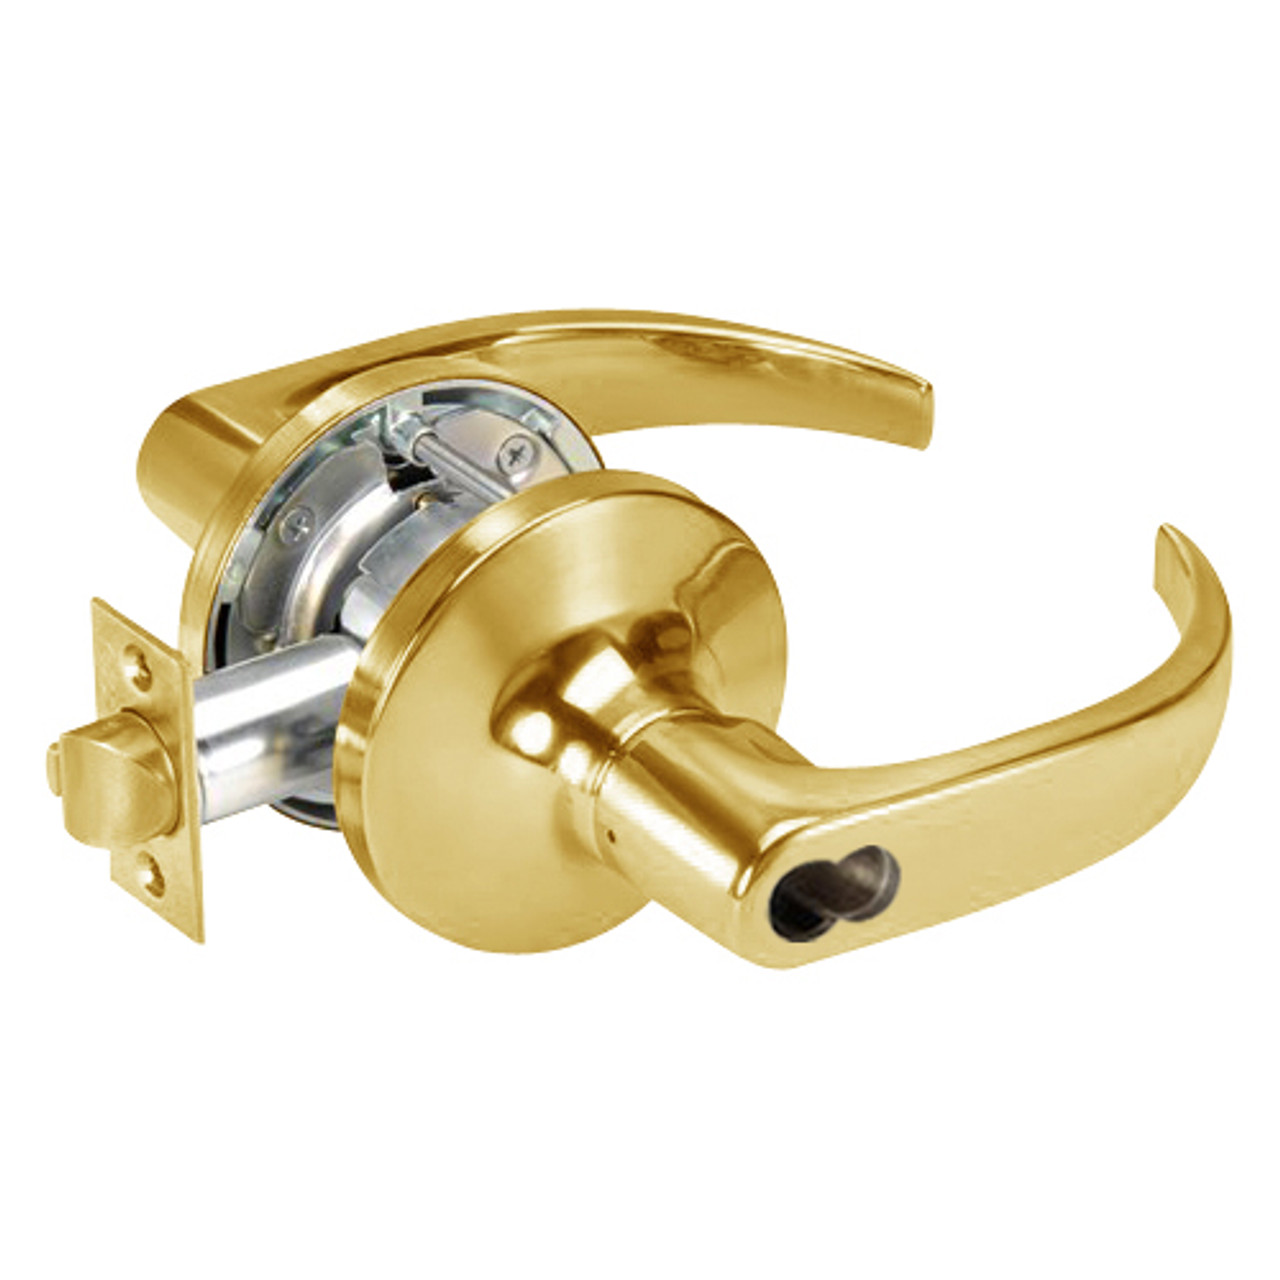 B-PB5422LN-605 Yale 5400LN Series Single Cylinder Corridor Cylindrical Locks with Pacific Beach Lever Prepped for SFIC in Bright Brass